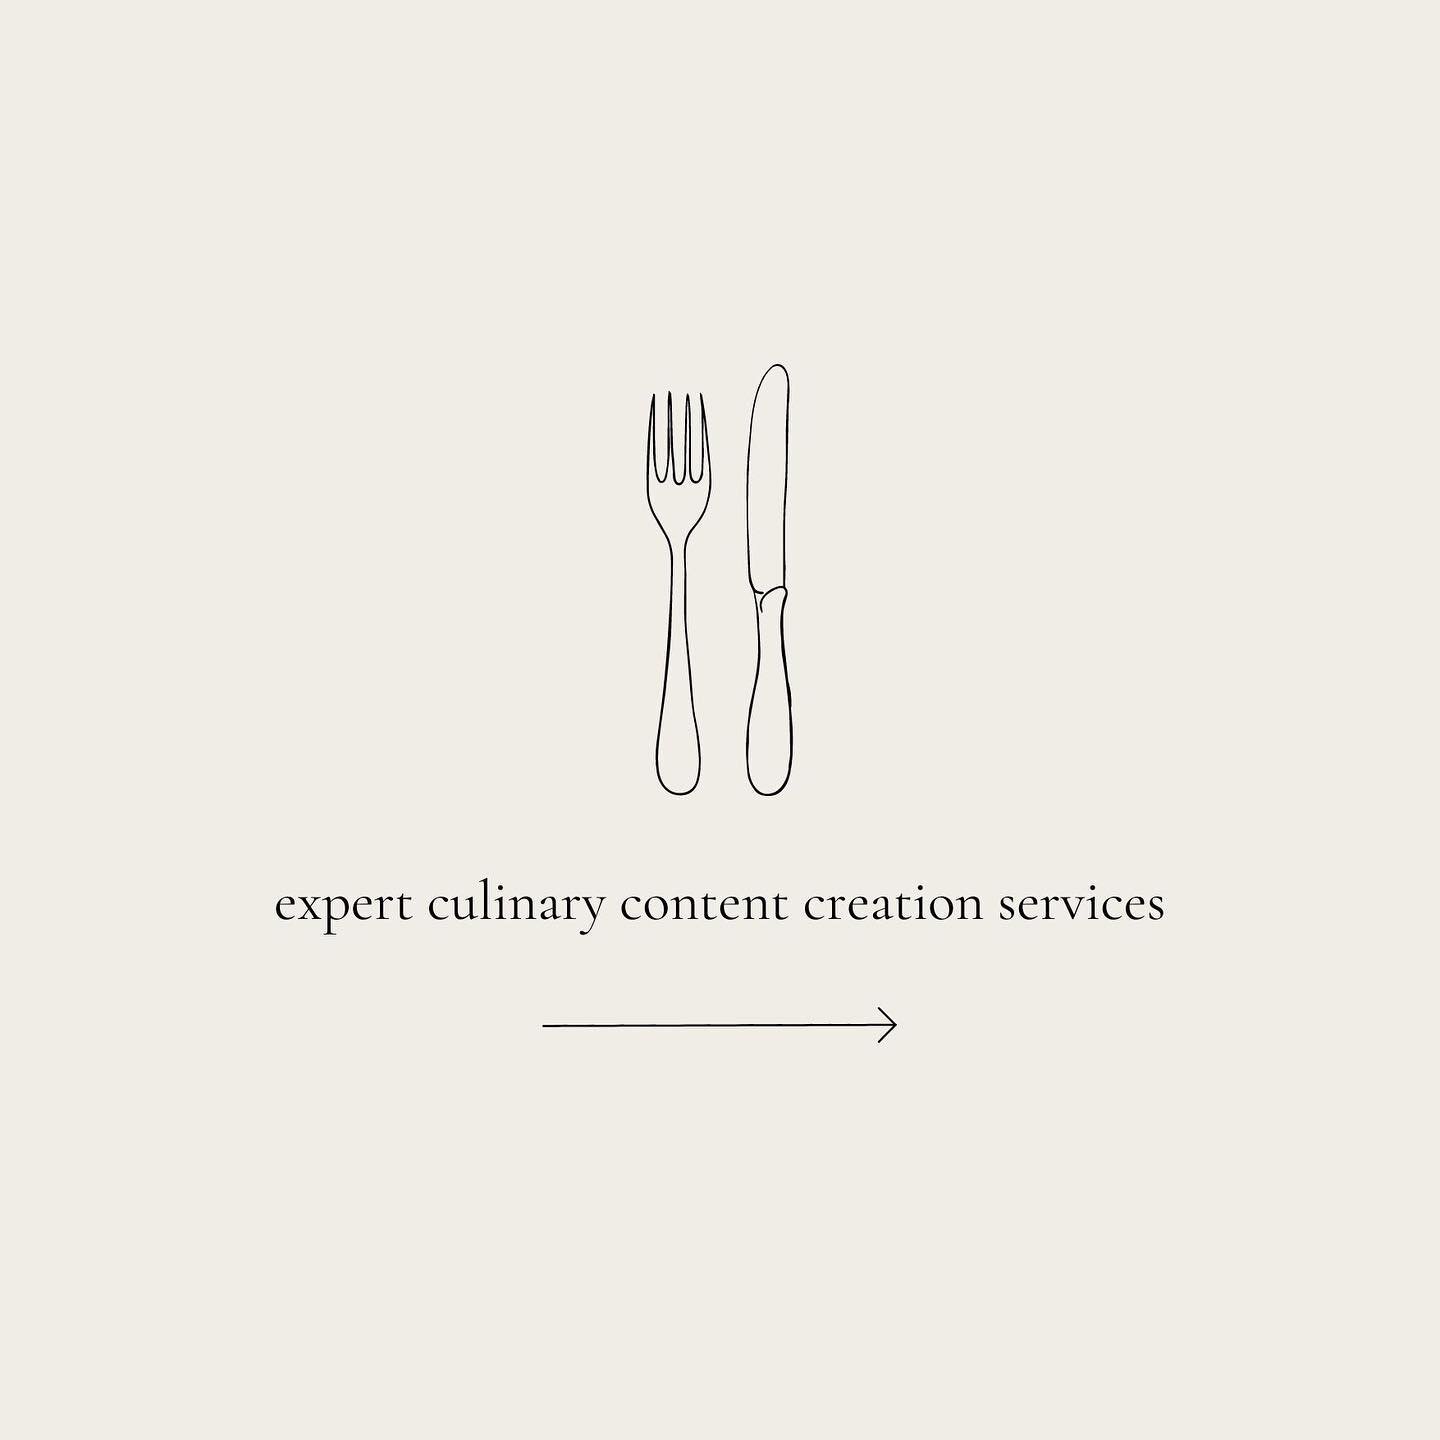 Do you have an independent business in the food industry? 🍴

Being fellow foodies, we&rsquo;re excited to offer expert culinary content creation and chef-standard food styling for those looking to elevate their marketing.
We&rsquo;ll work with you t